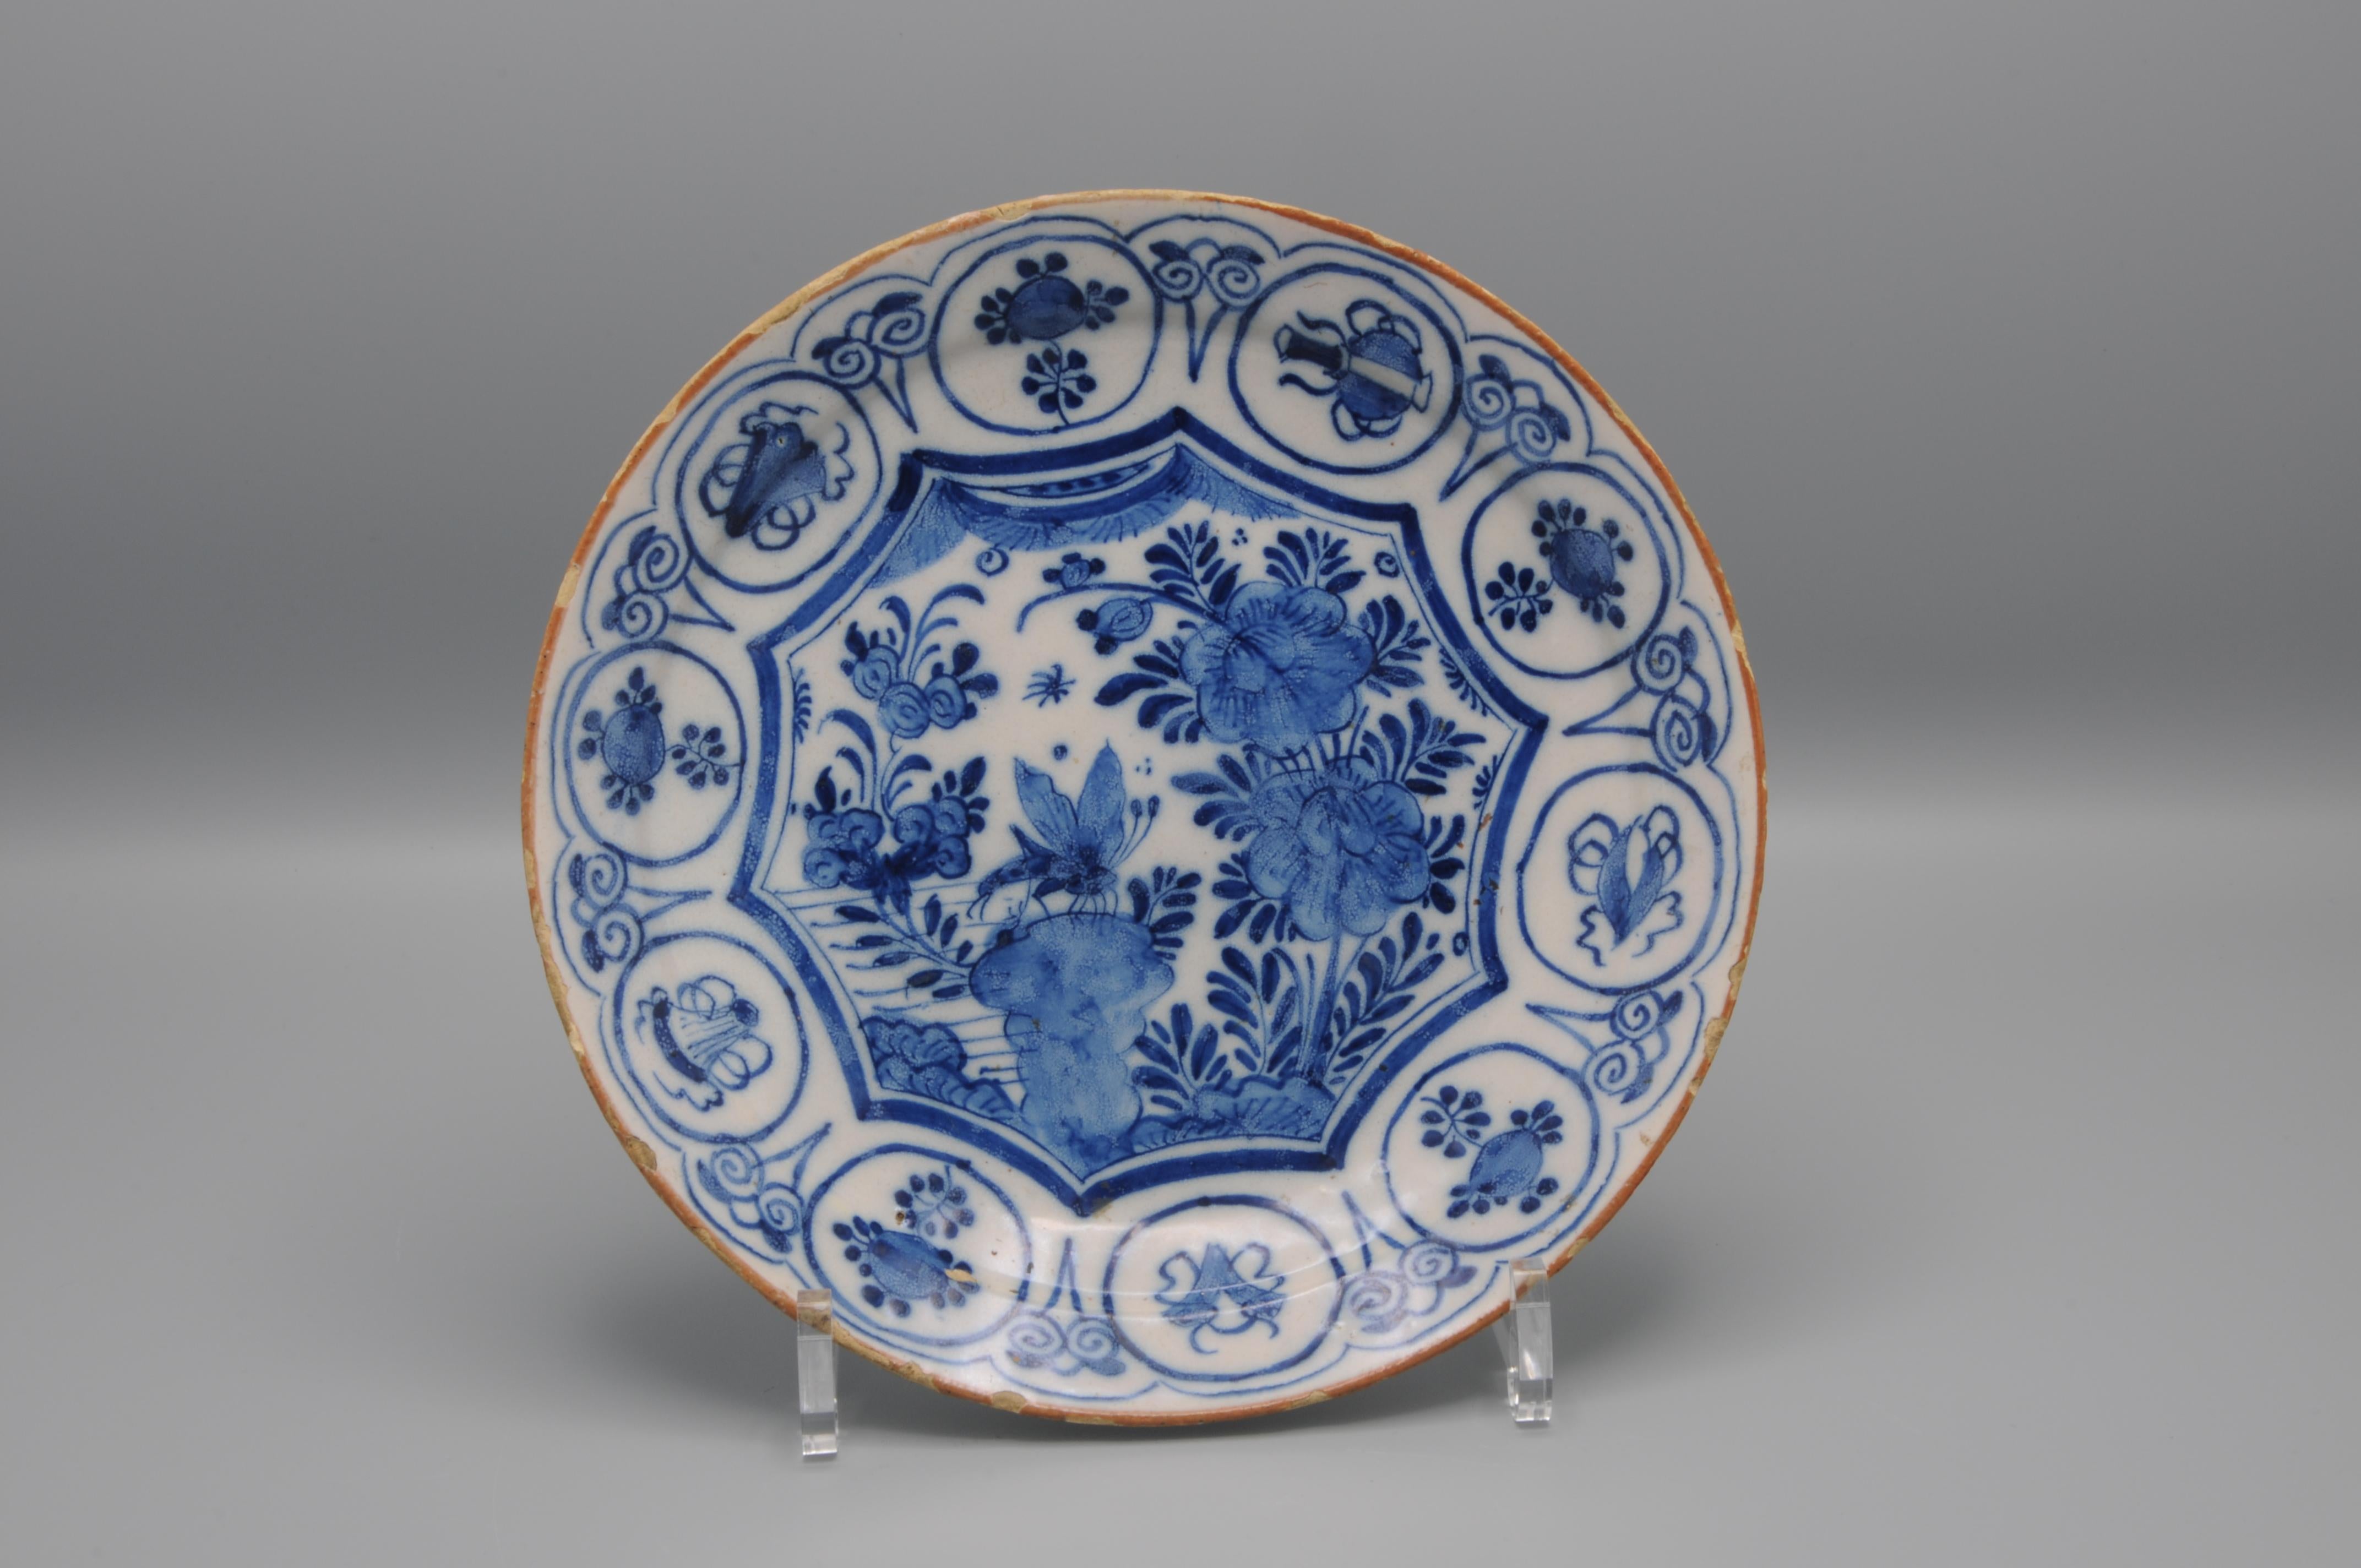 Dutch Delft Chinoiserie plate depicting a large dragonfly, in a Chinese garden, sitting on a rock. All within a shaped octagonal border. The rim in brond and the wide border with a series of roundels depicting stylized flower heads and bugs.
The